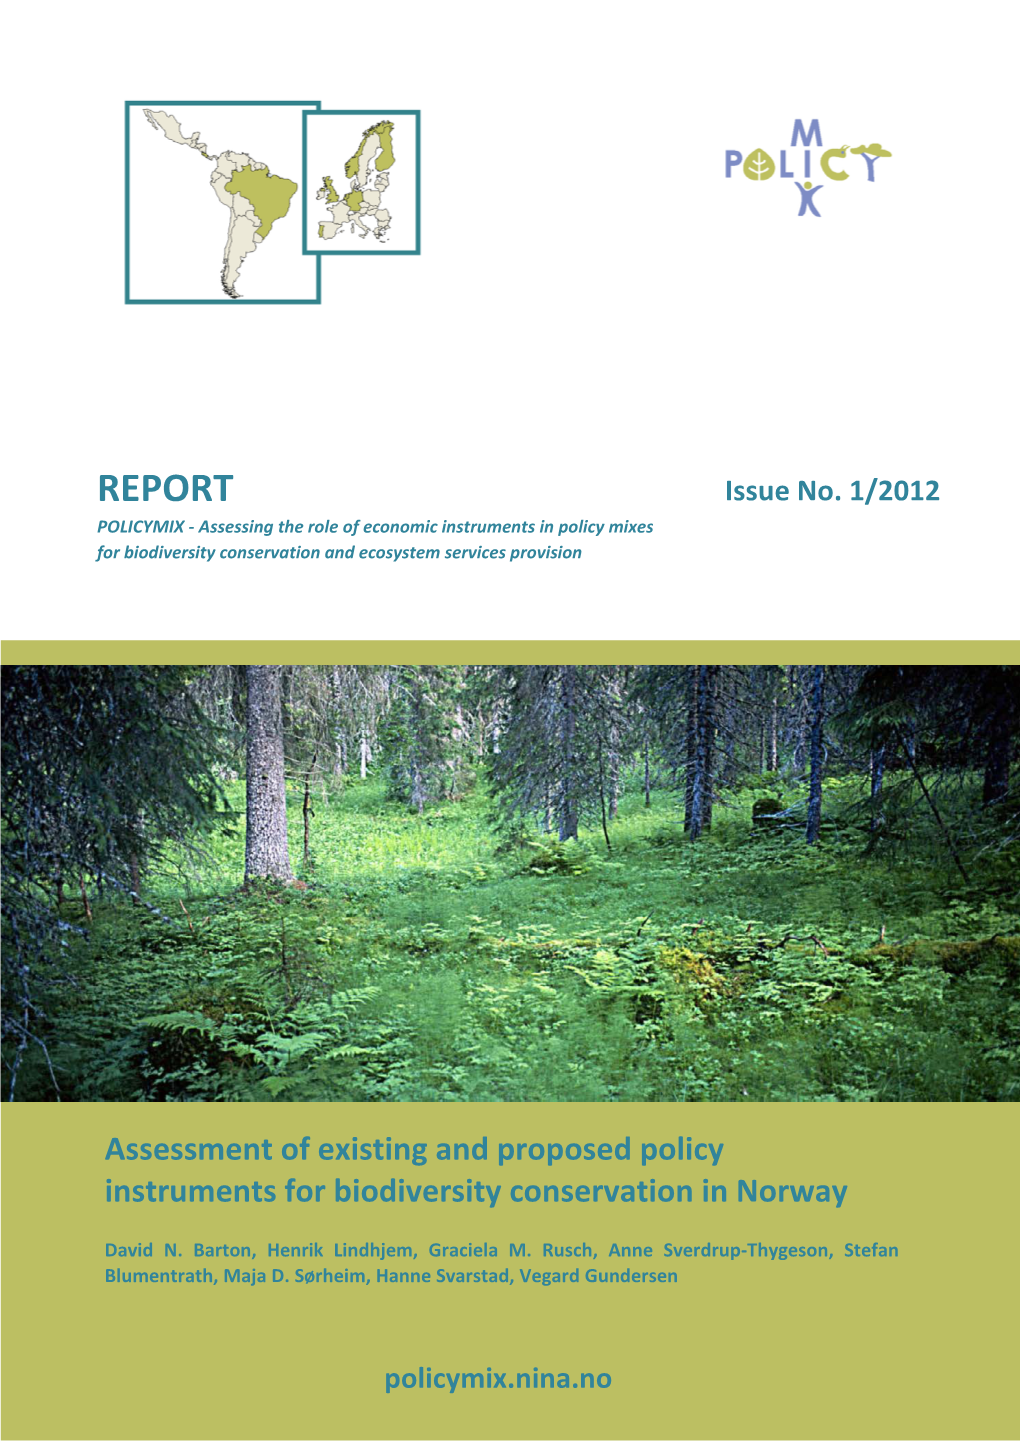 Assessment of Existing and Proposed Policy Instruments for Biodiversity Conservation in Norway